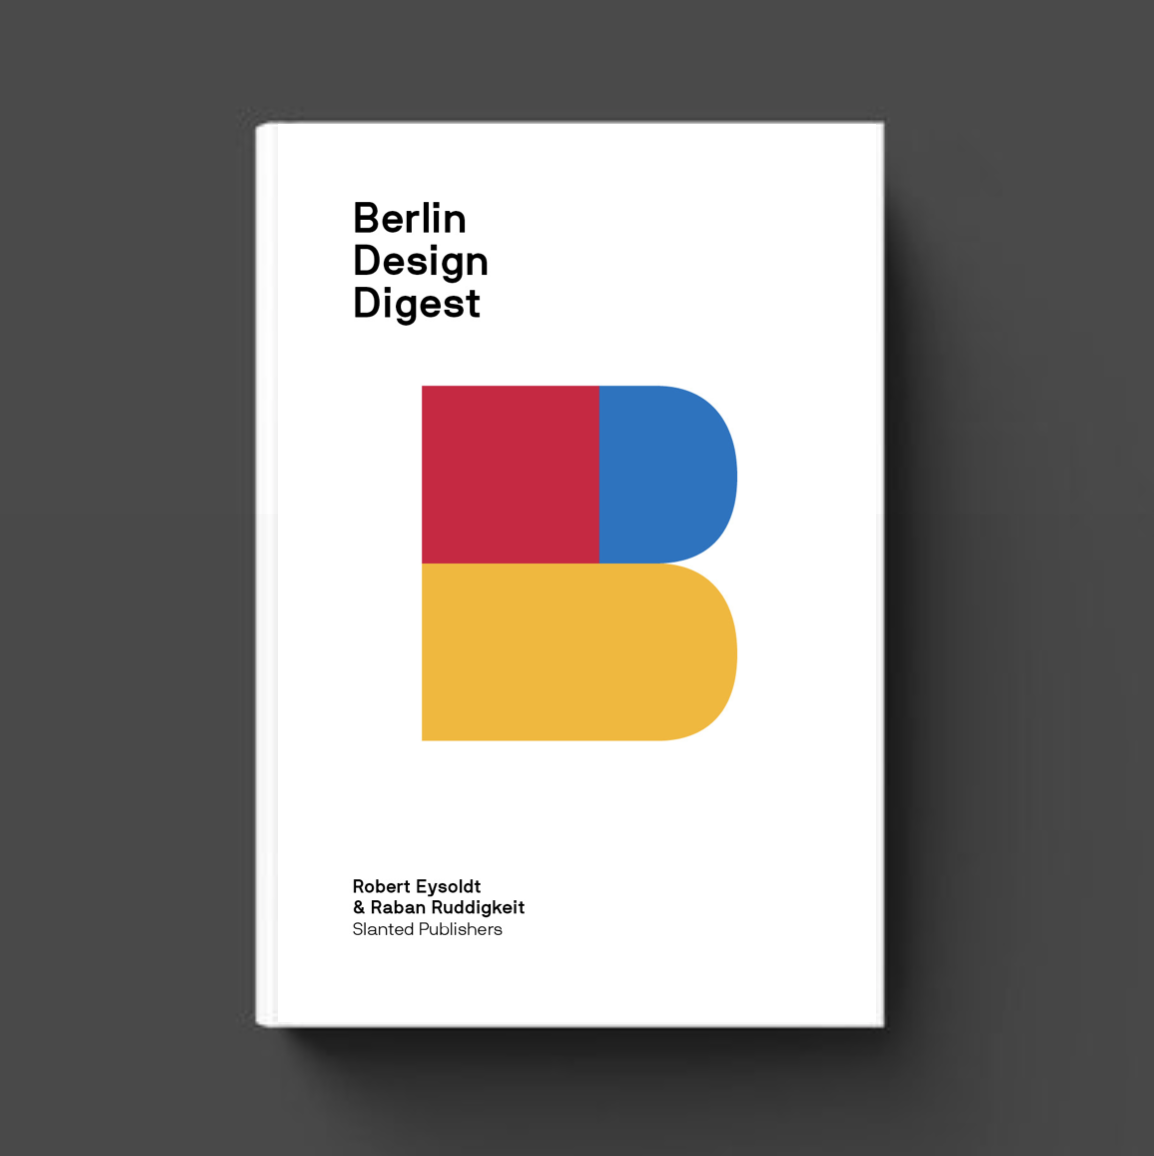 Berlin Design Digest, 100 projects, products and processes that connect Berlin with the world